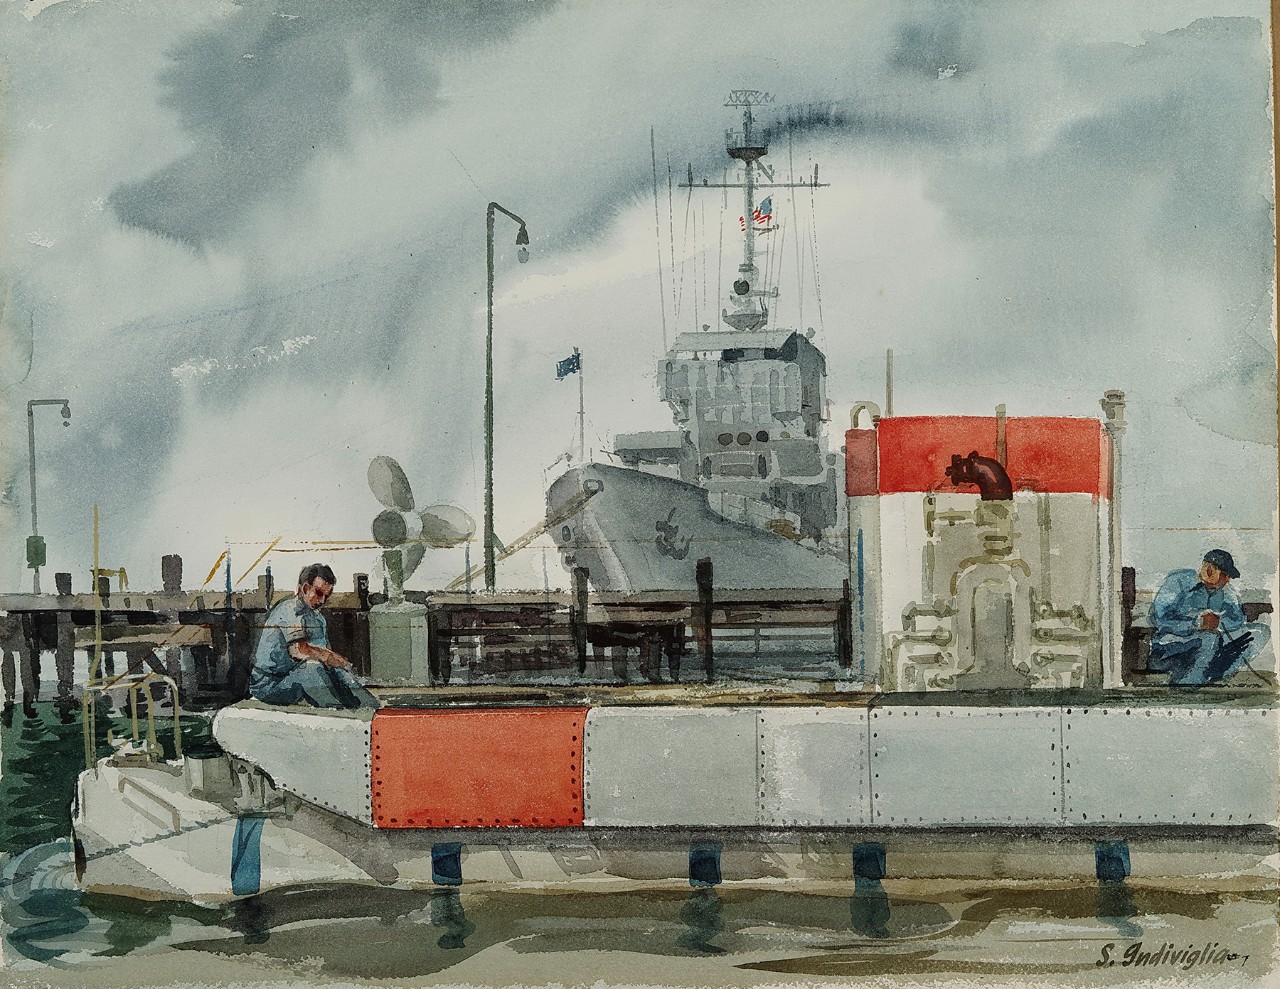 Trieste is tied to a pier with two men working on the deck, behind is another Navy ship